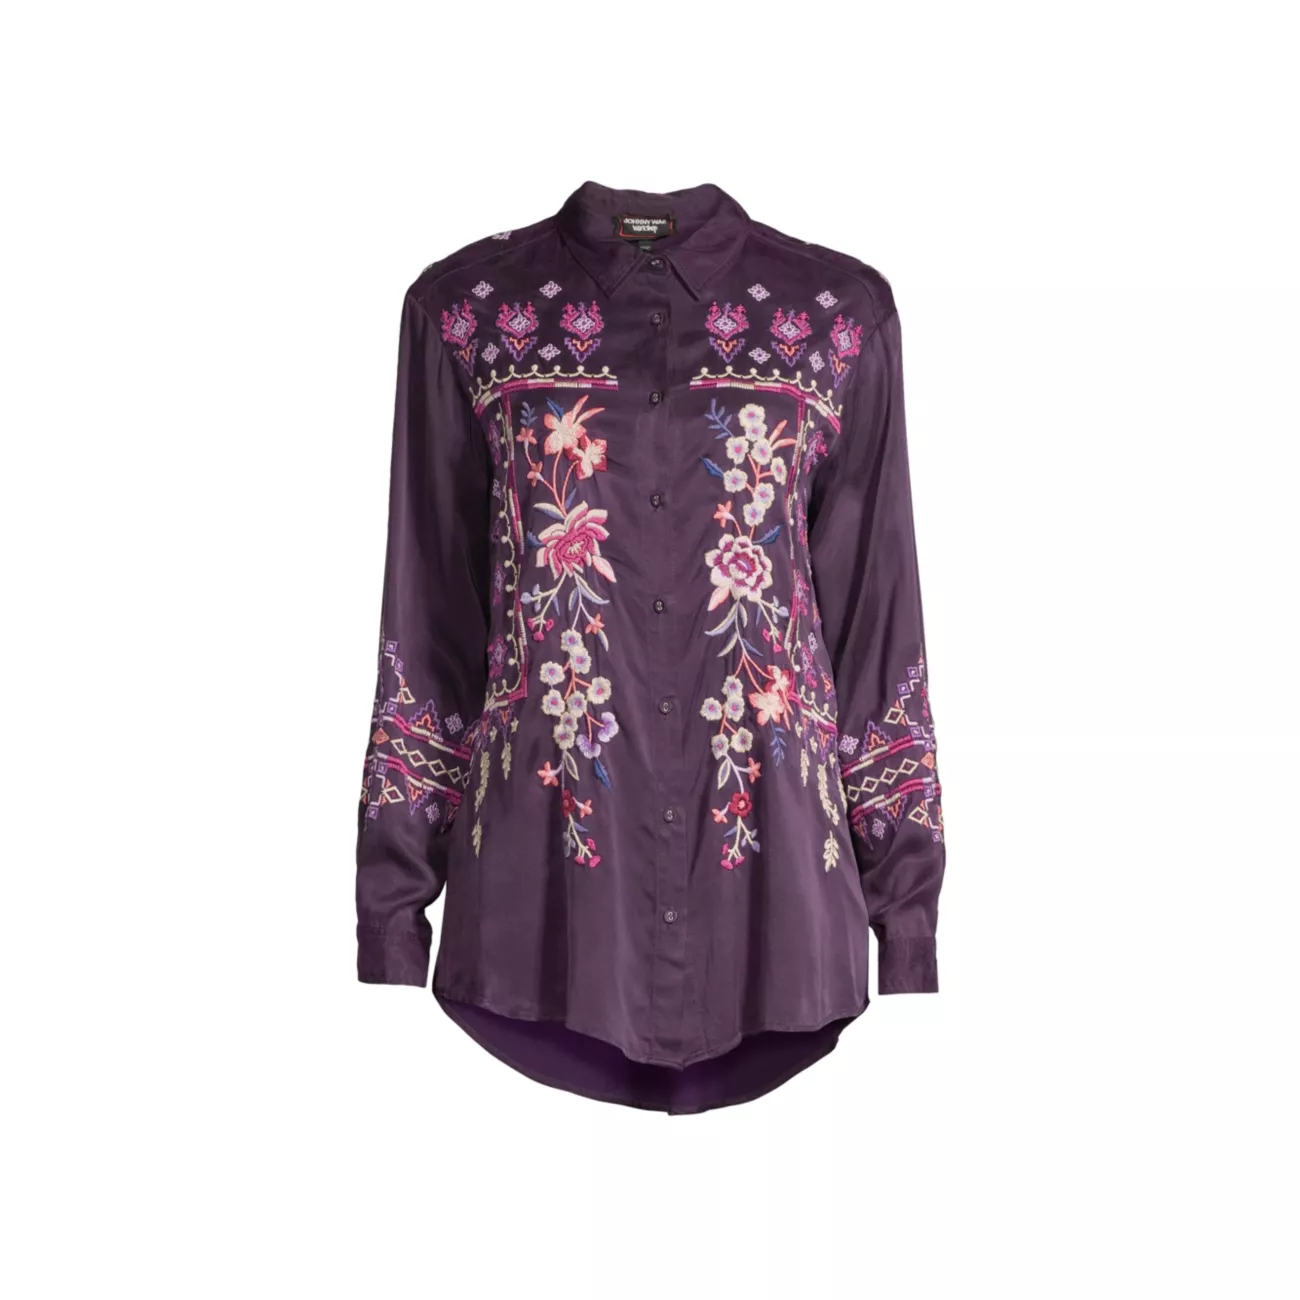 Curaçao Embroidered High-Low Tunic Johnny Was